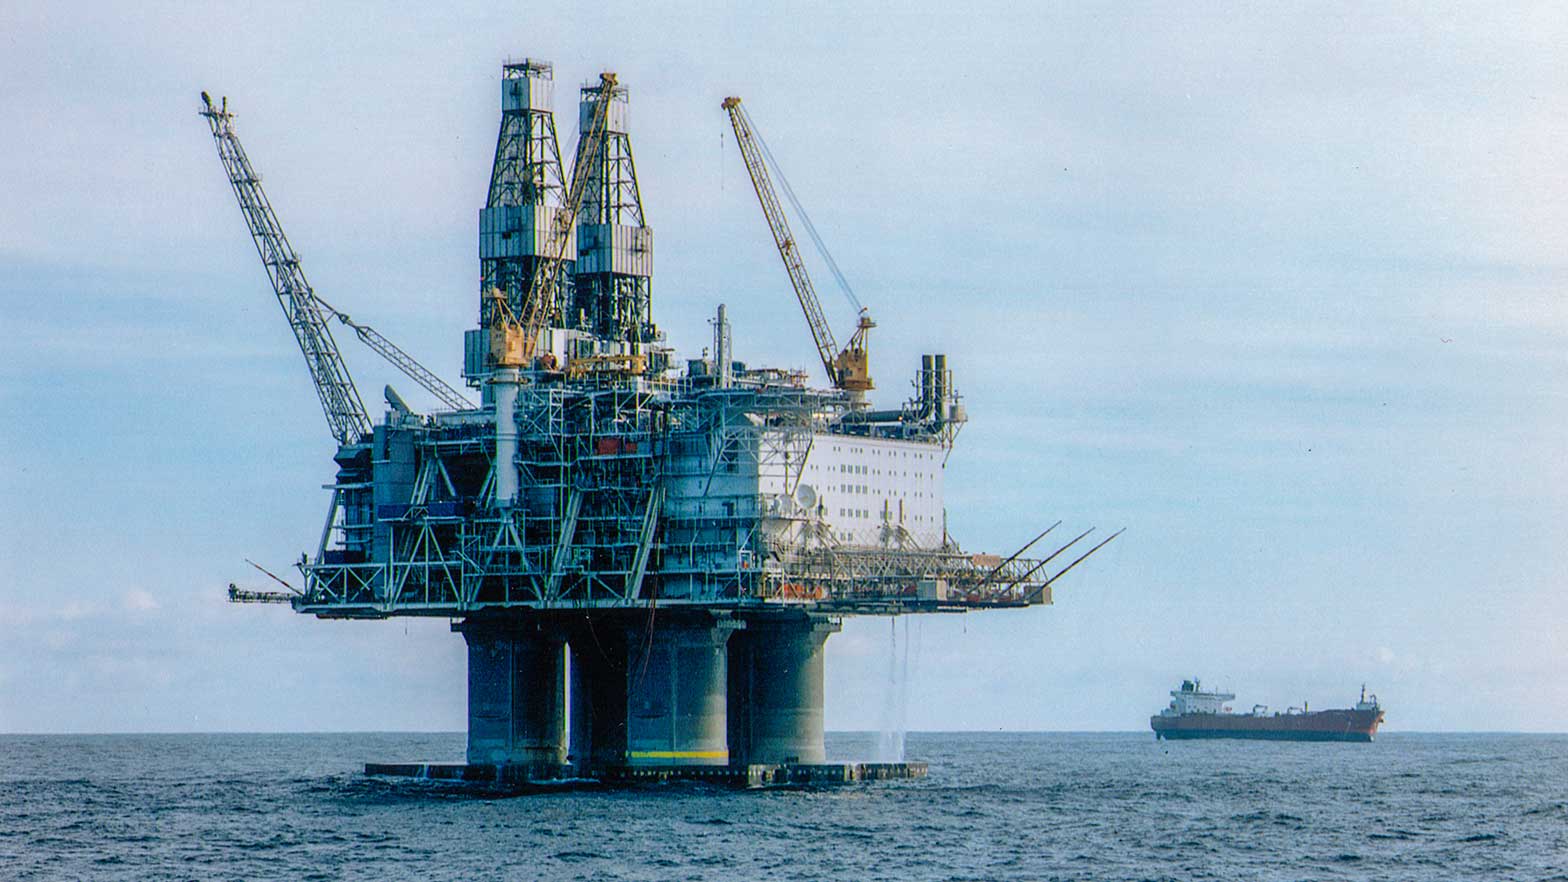 image of an oil rig over the water